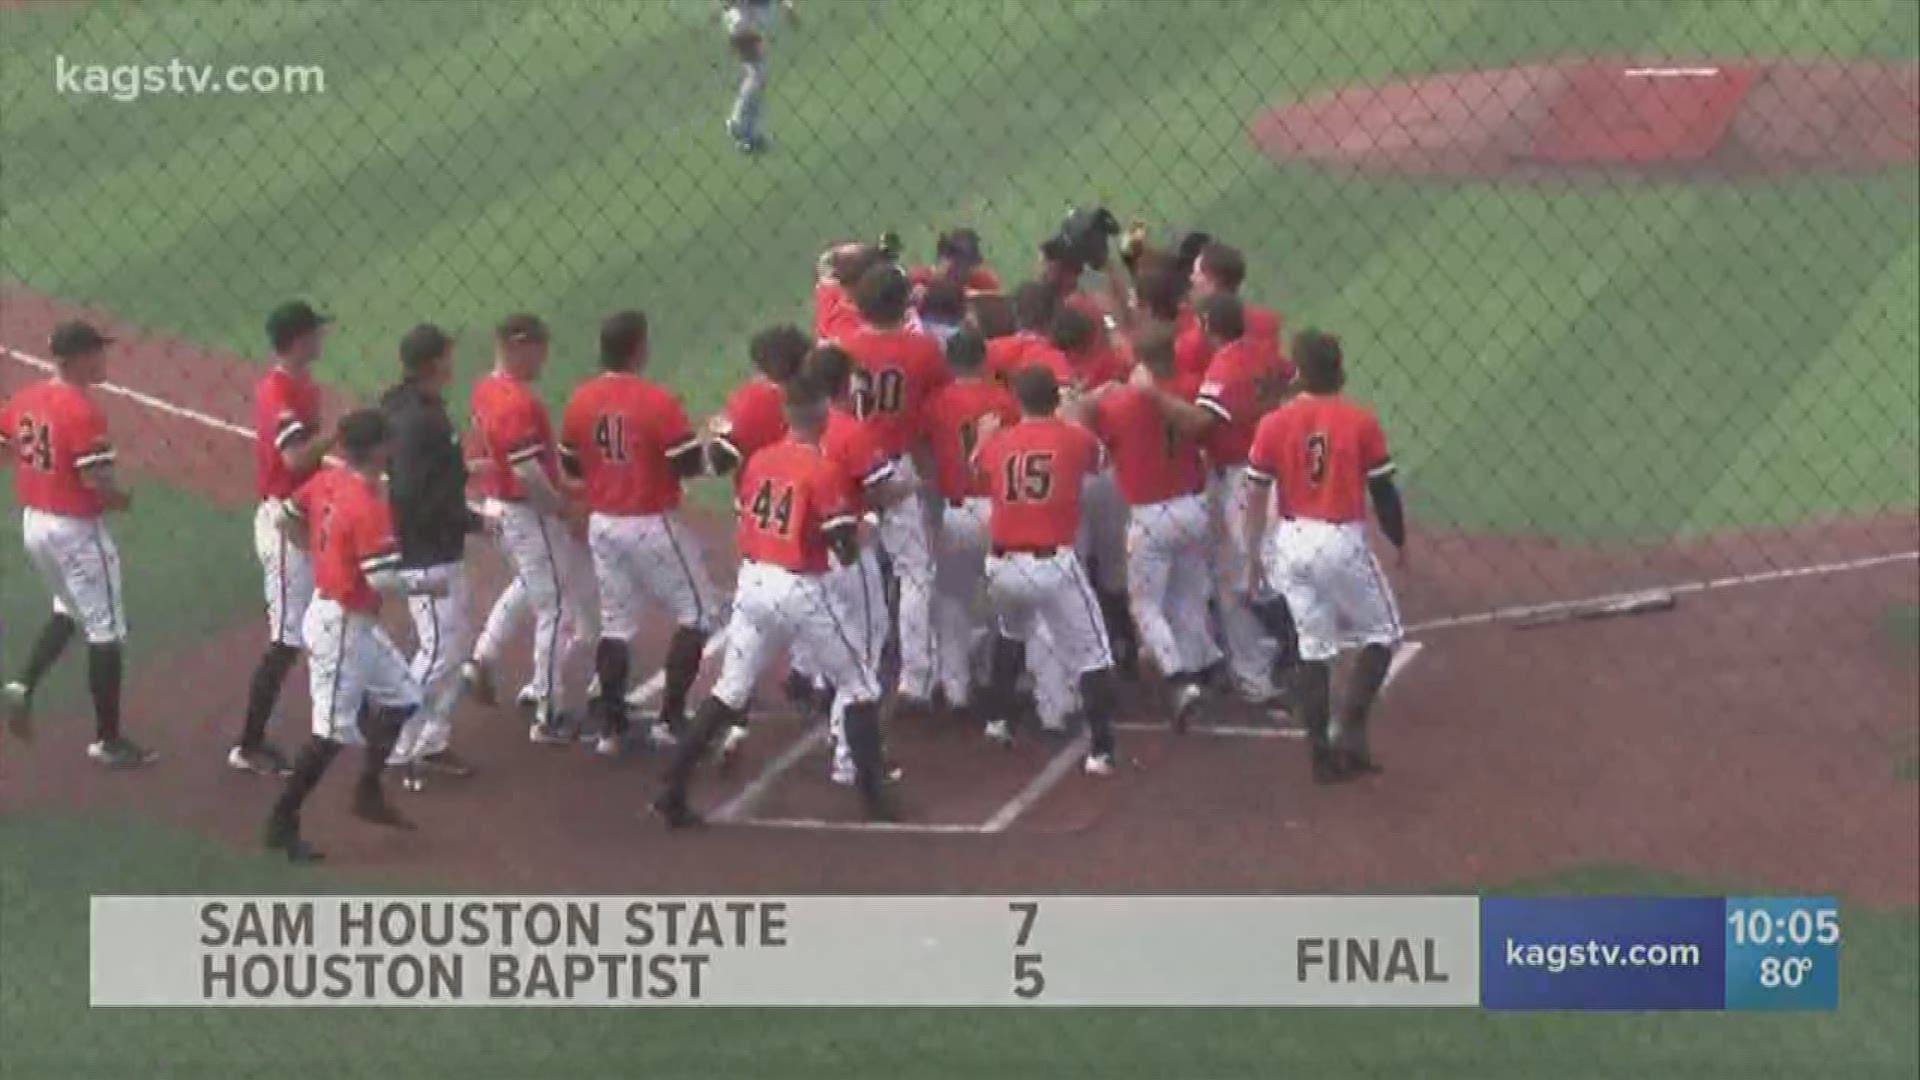 Clayton Harp drilled a 2-run home run in the bottom of the ninth inning to give Sam Houston State a 7-5 win over Houston Baptist.